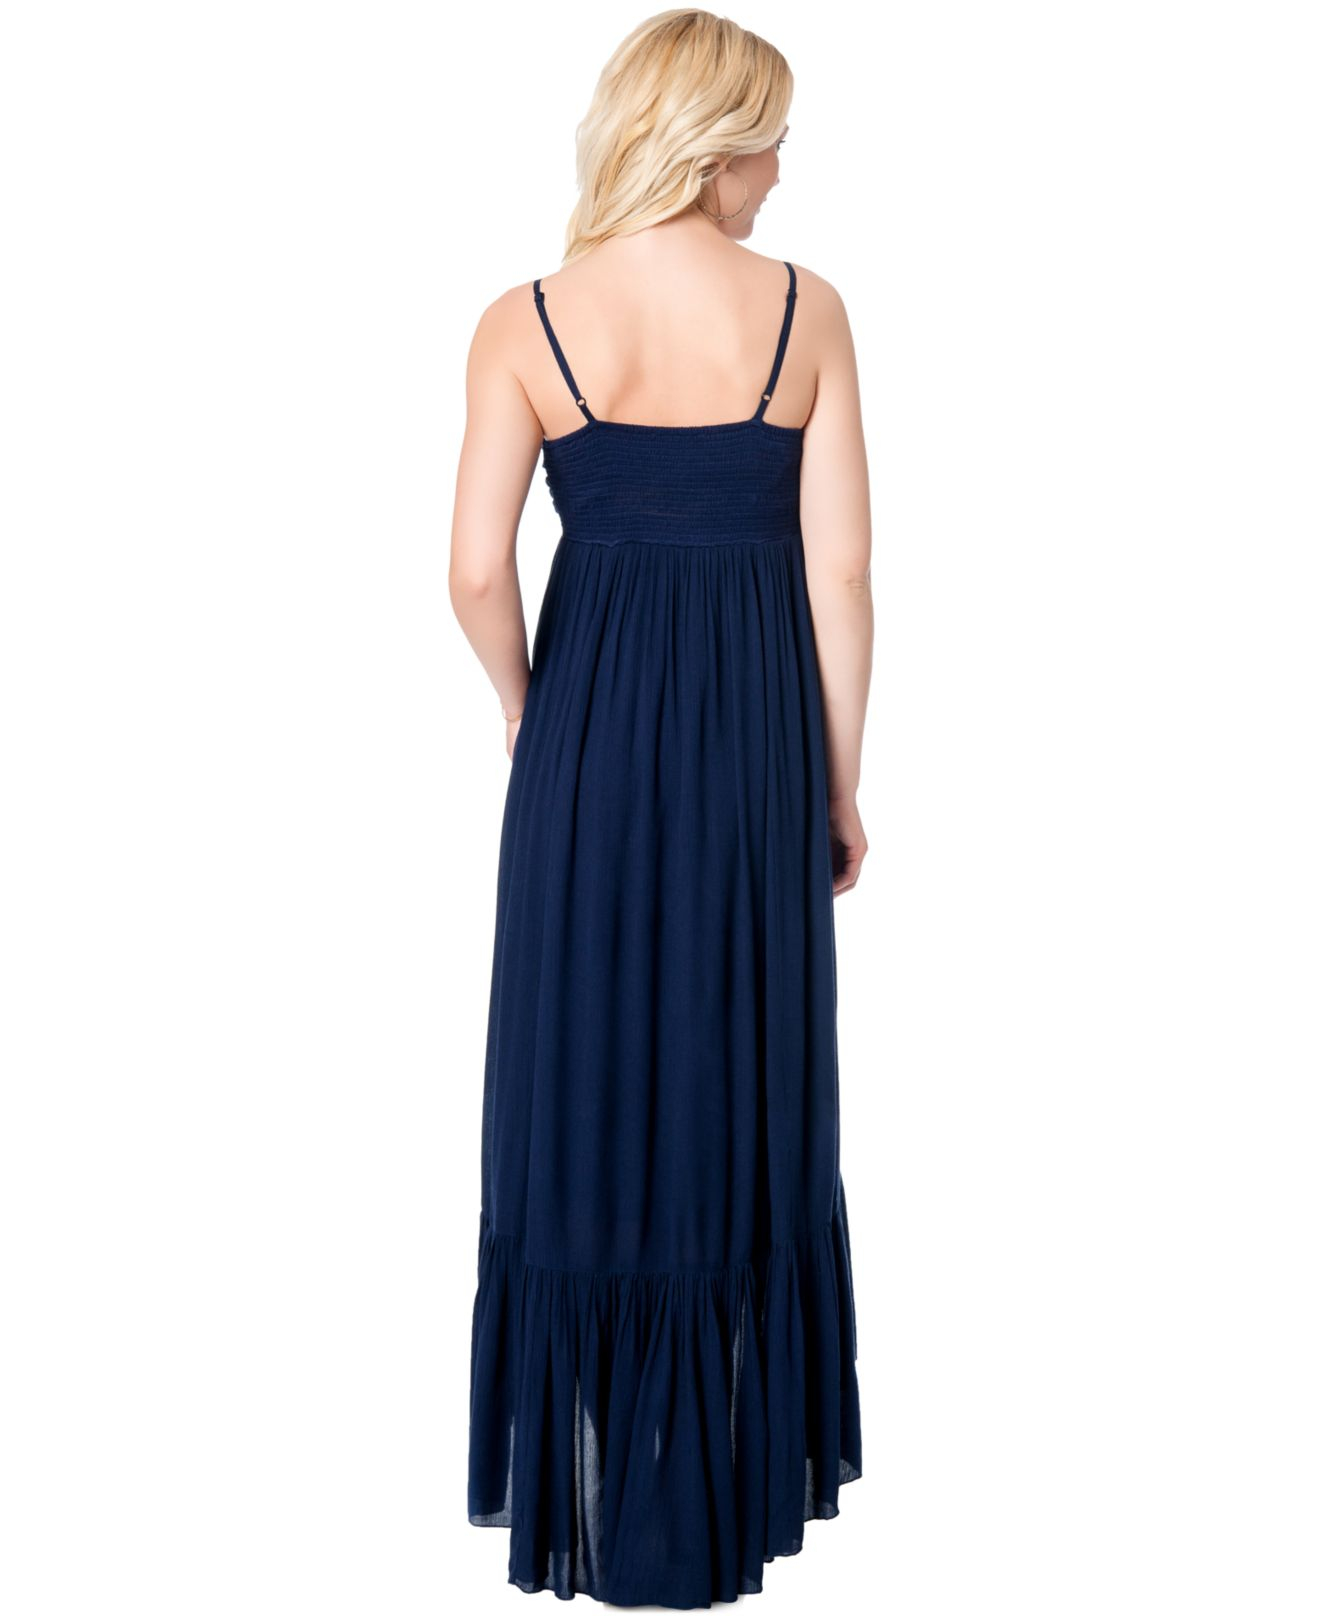 Lyst - Jessica Simpson Maternity Tie-Front Maxi Dress in Blue